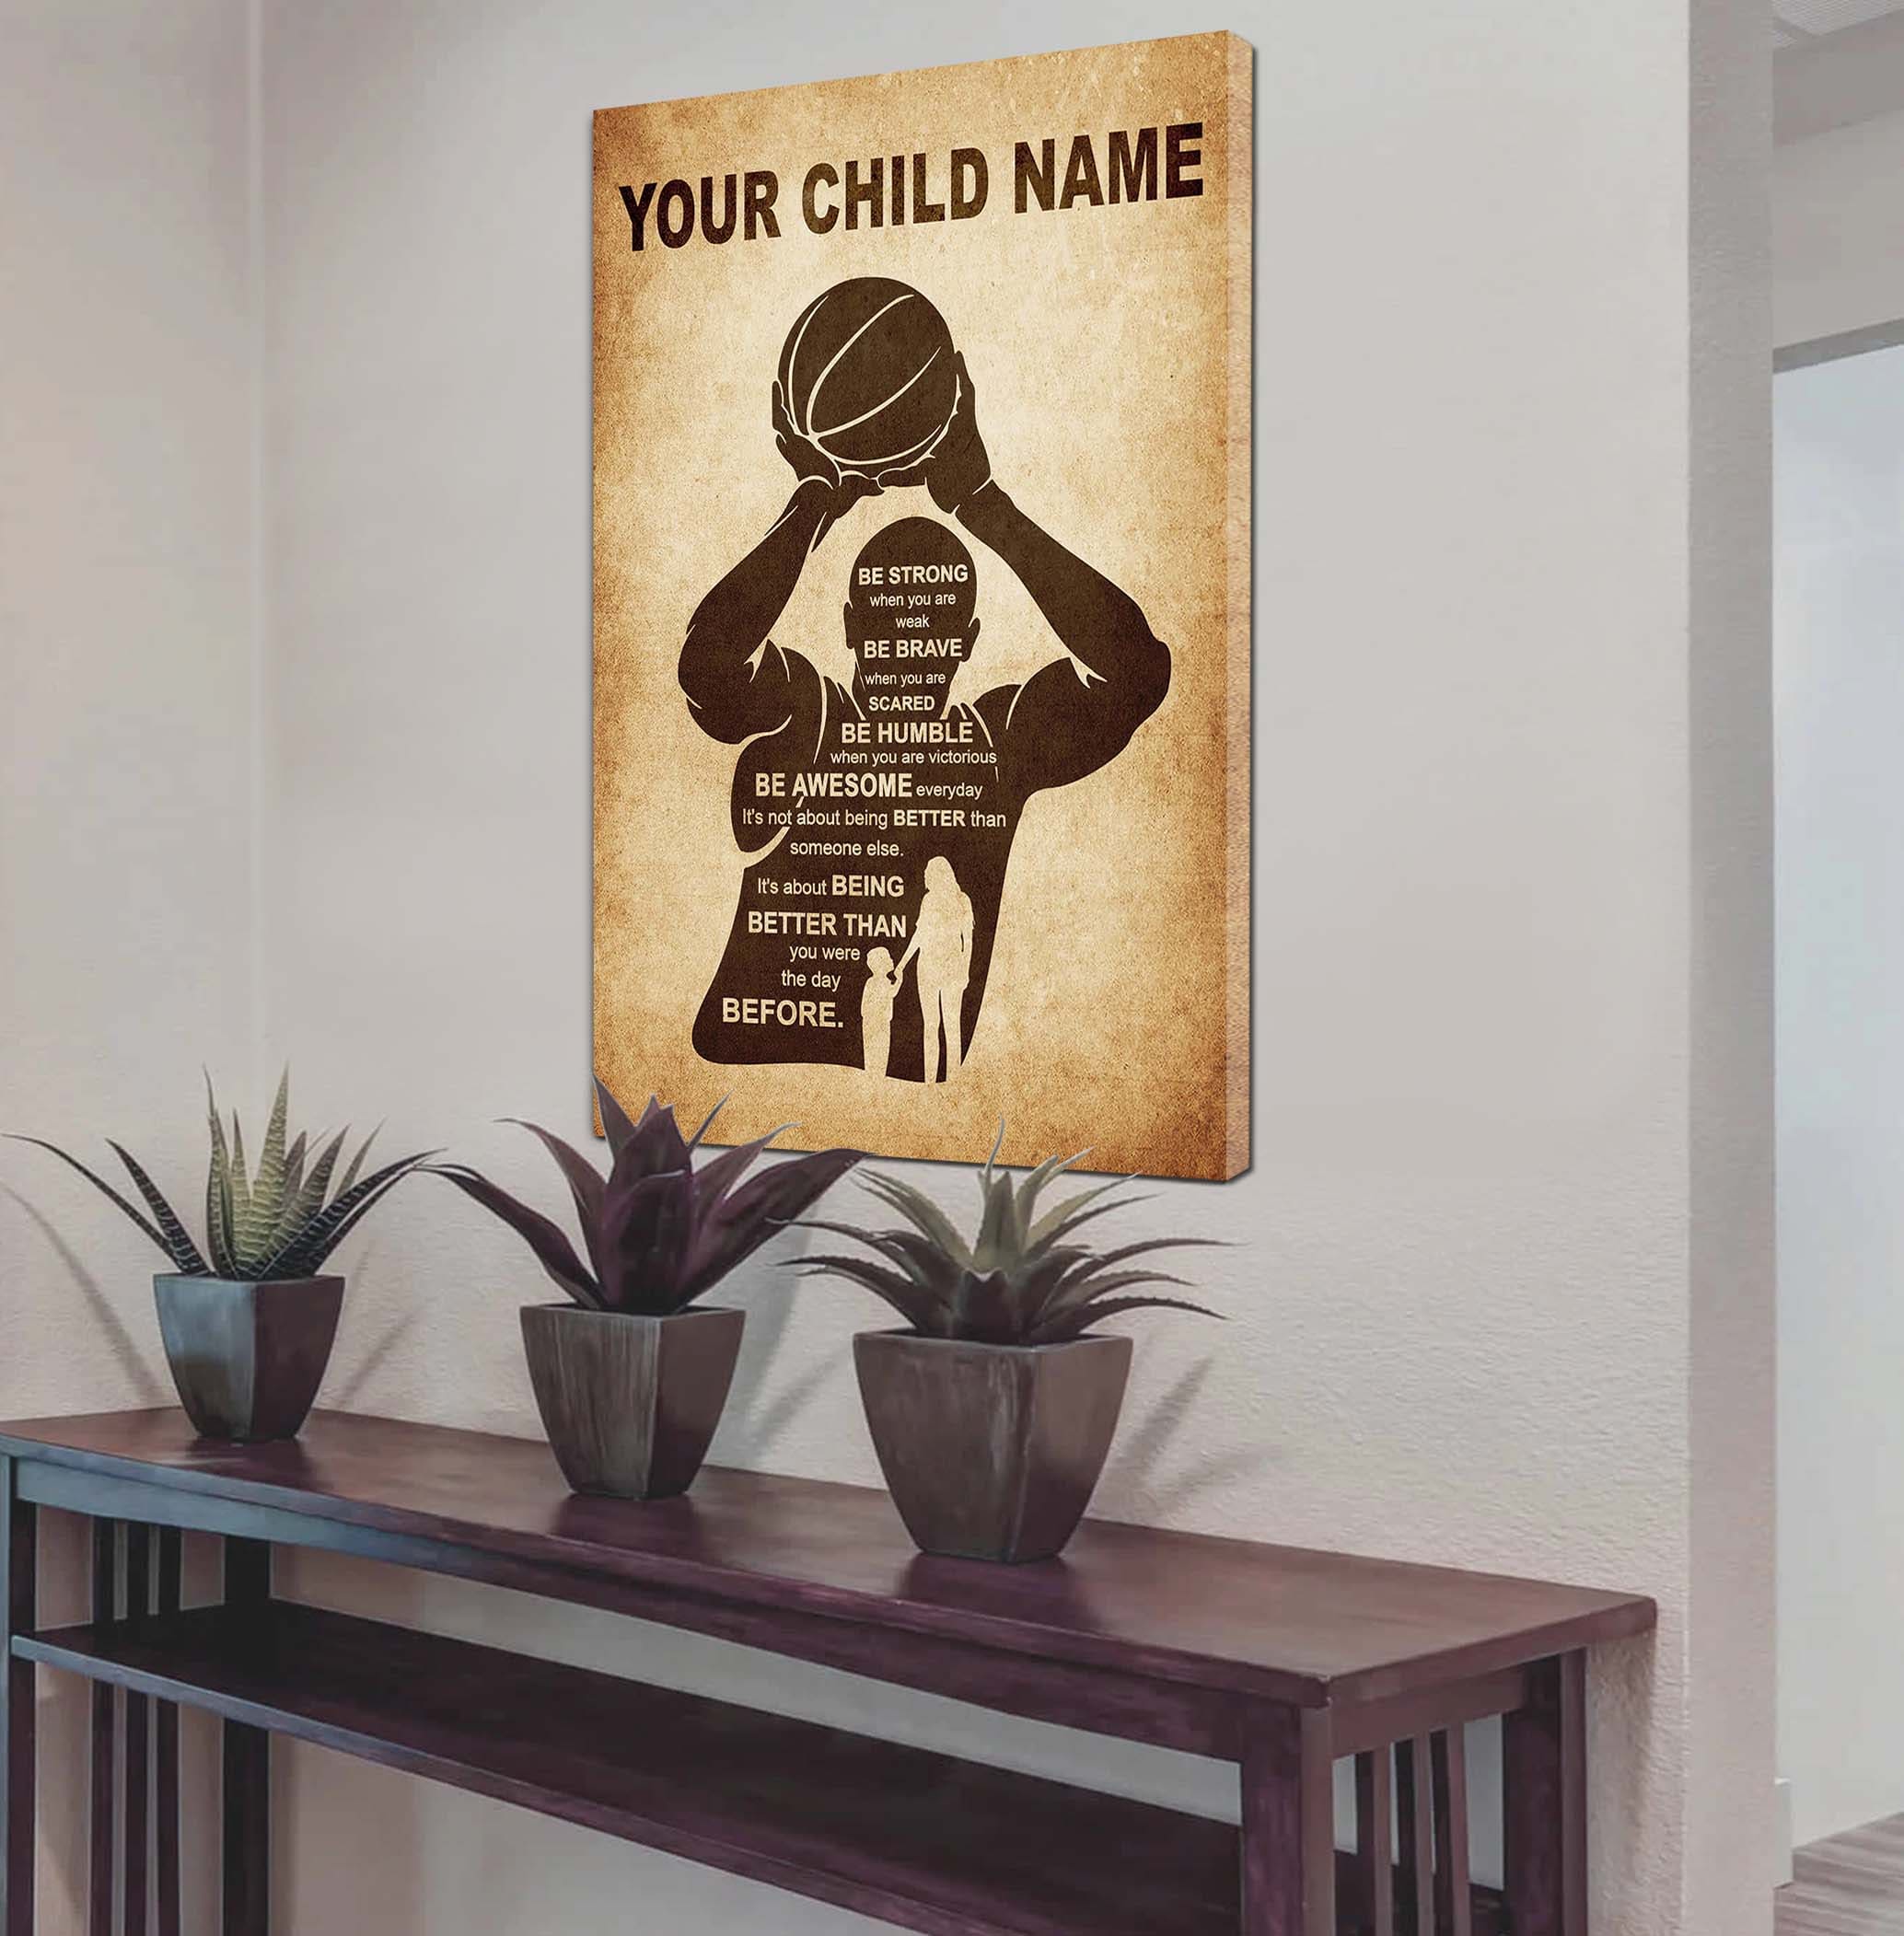 Be Awesome Everyday Personalized Your Child Name From Mom Dad To Son Basketball Poster Canvas Gifts For Your Son